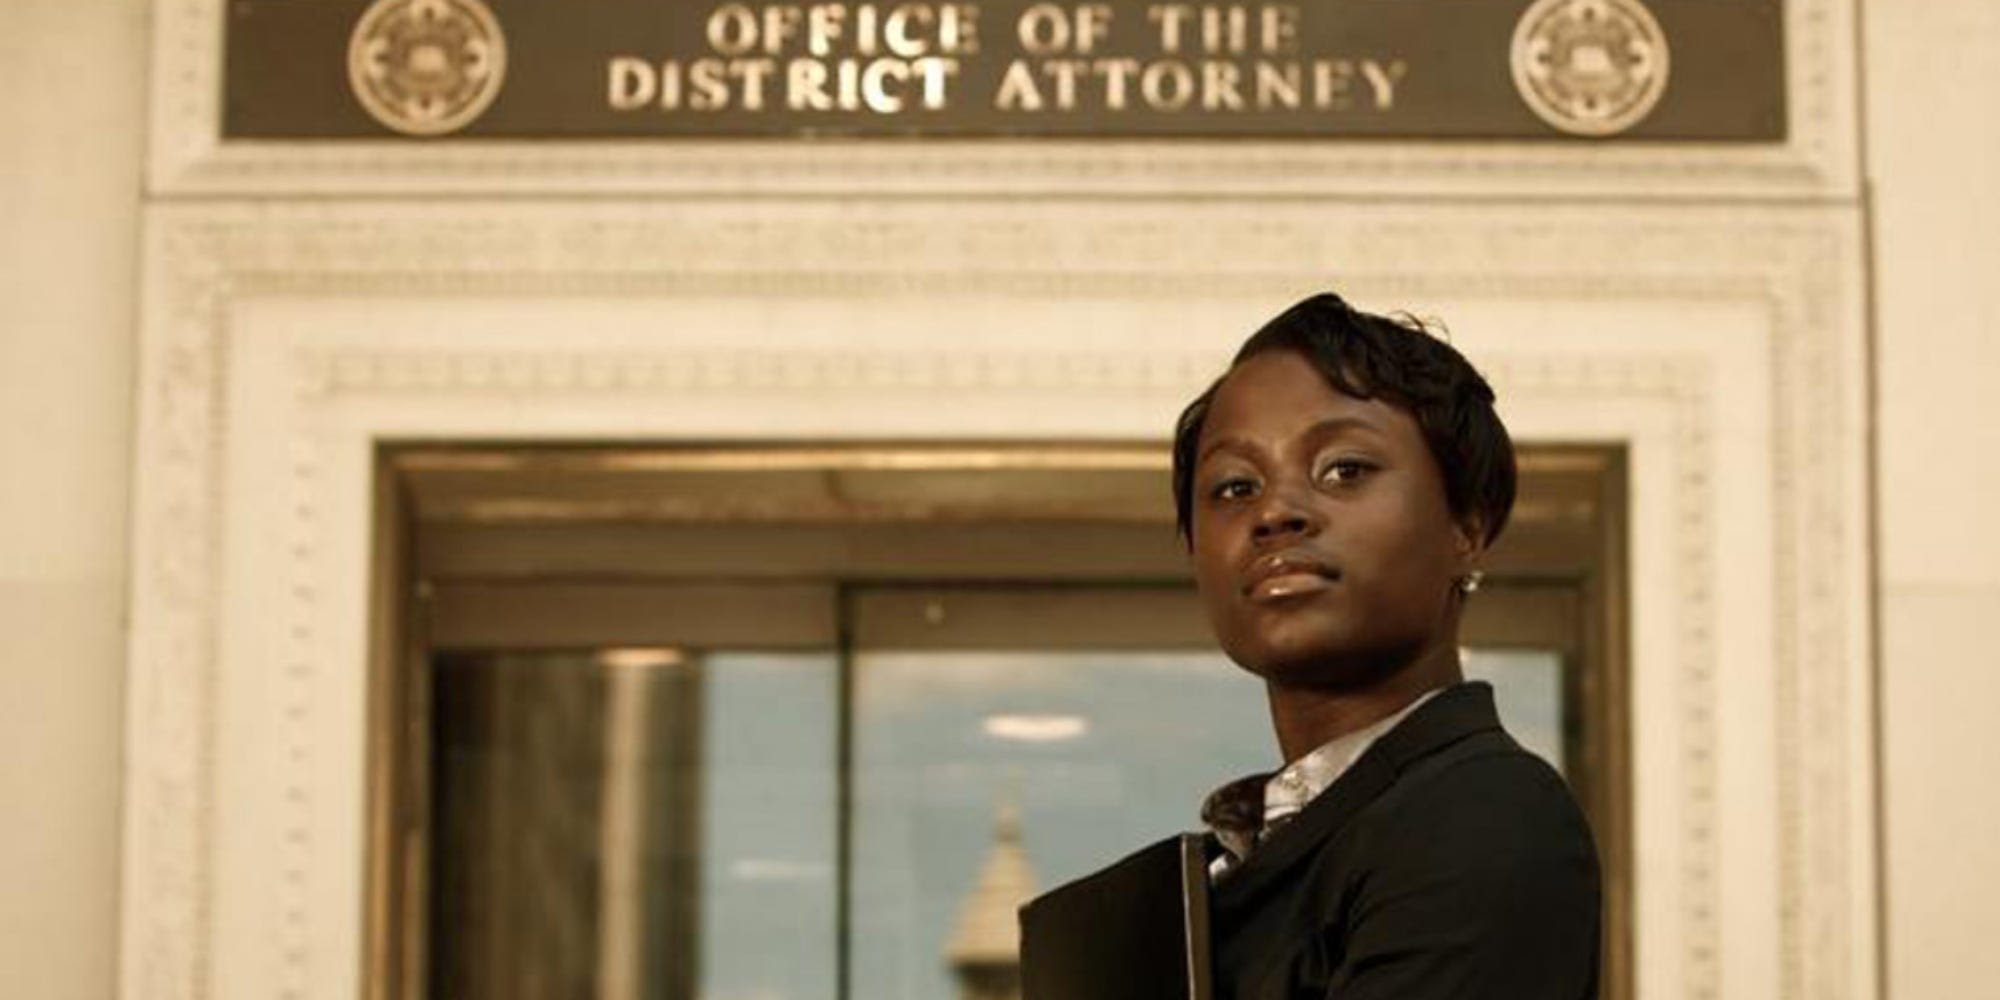 Local Politics 101: The Role of a District Attorney